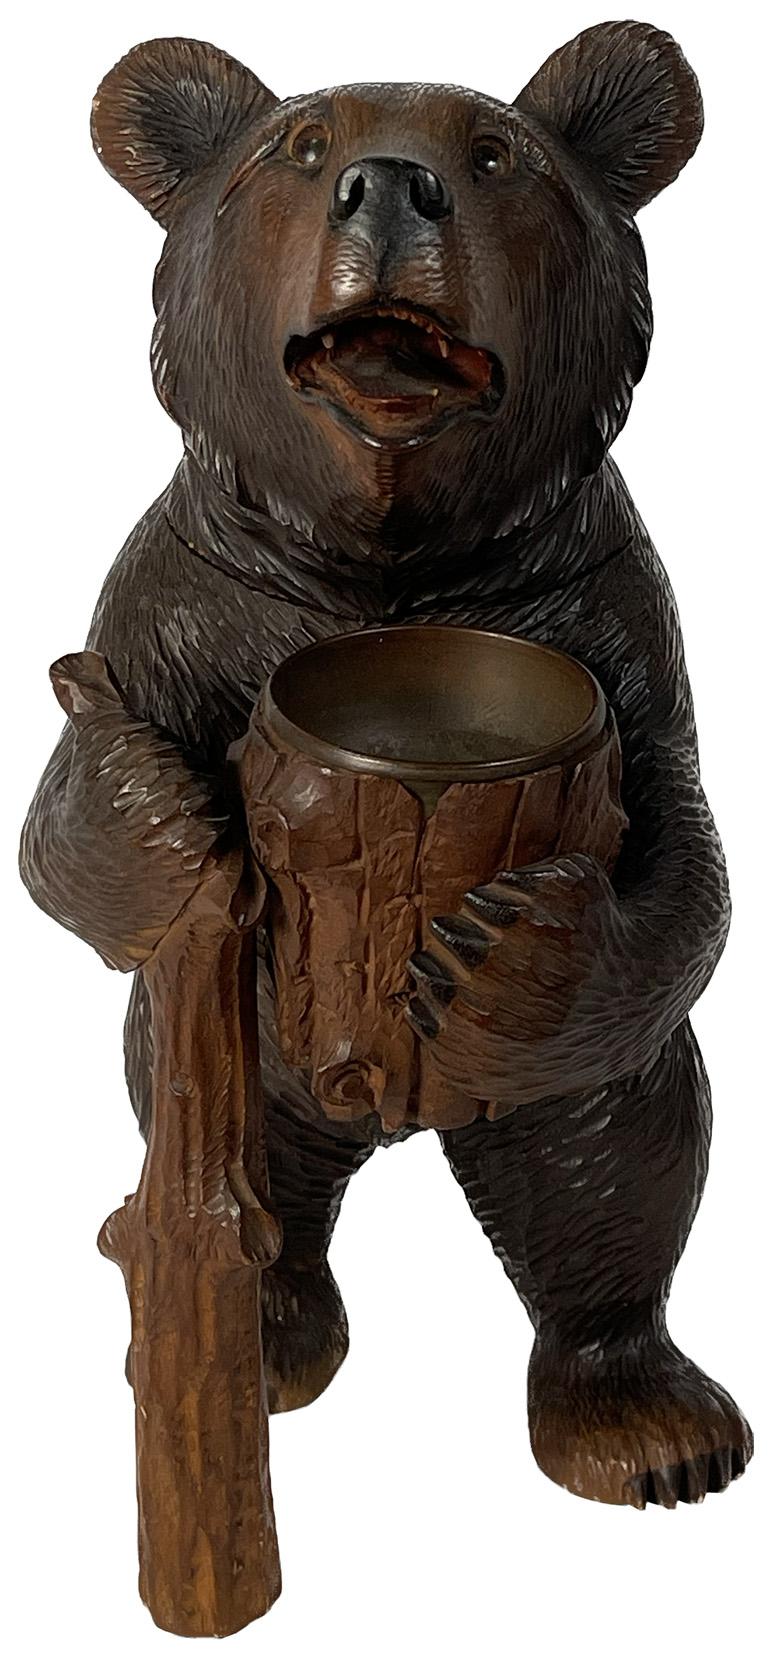 Late 19th century carved black Forest standing bear with glass eyes, holding a metal lined bowl with an opening hinged head.

Measures: 7